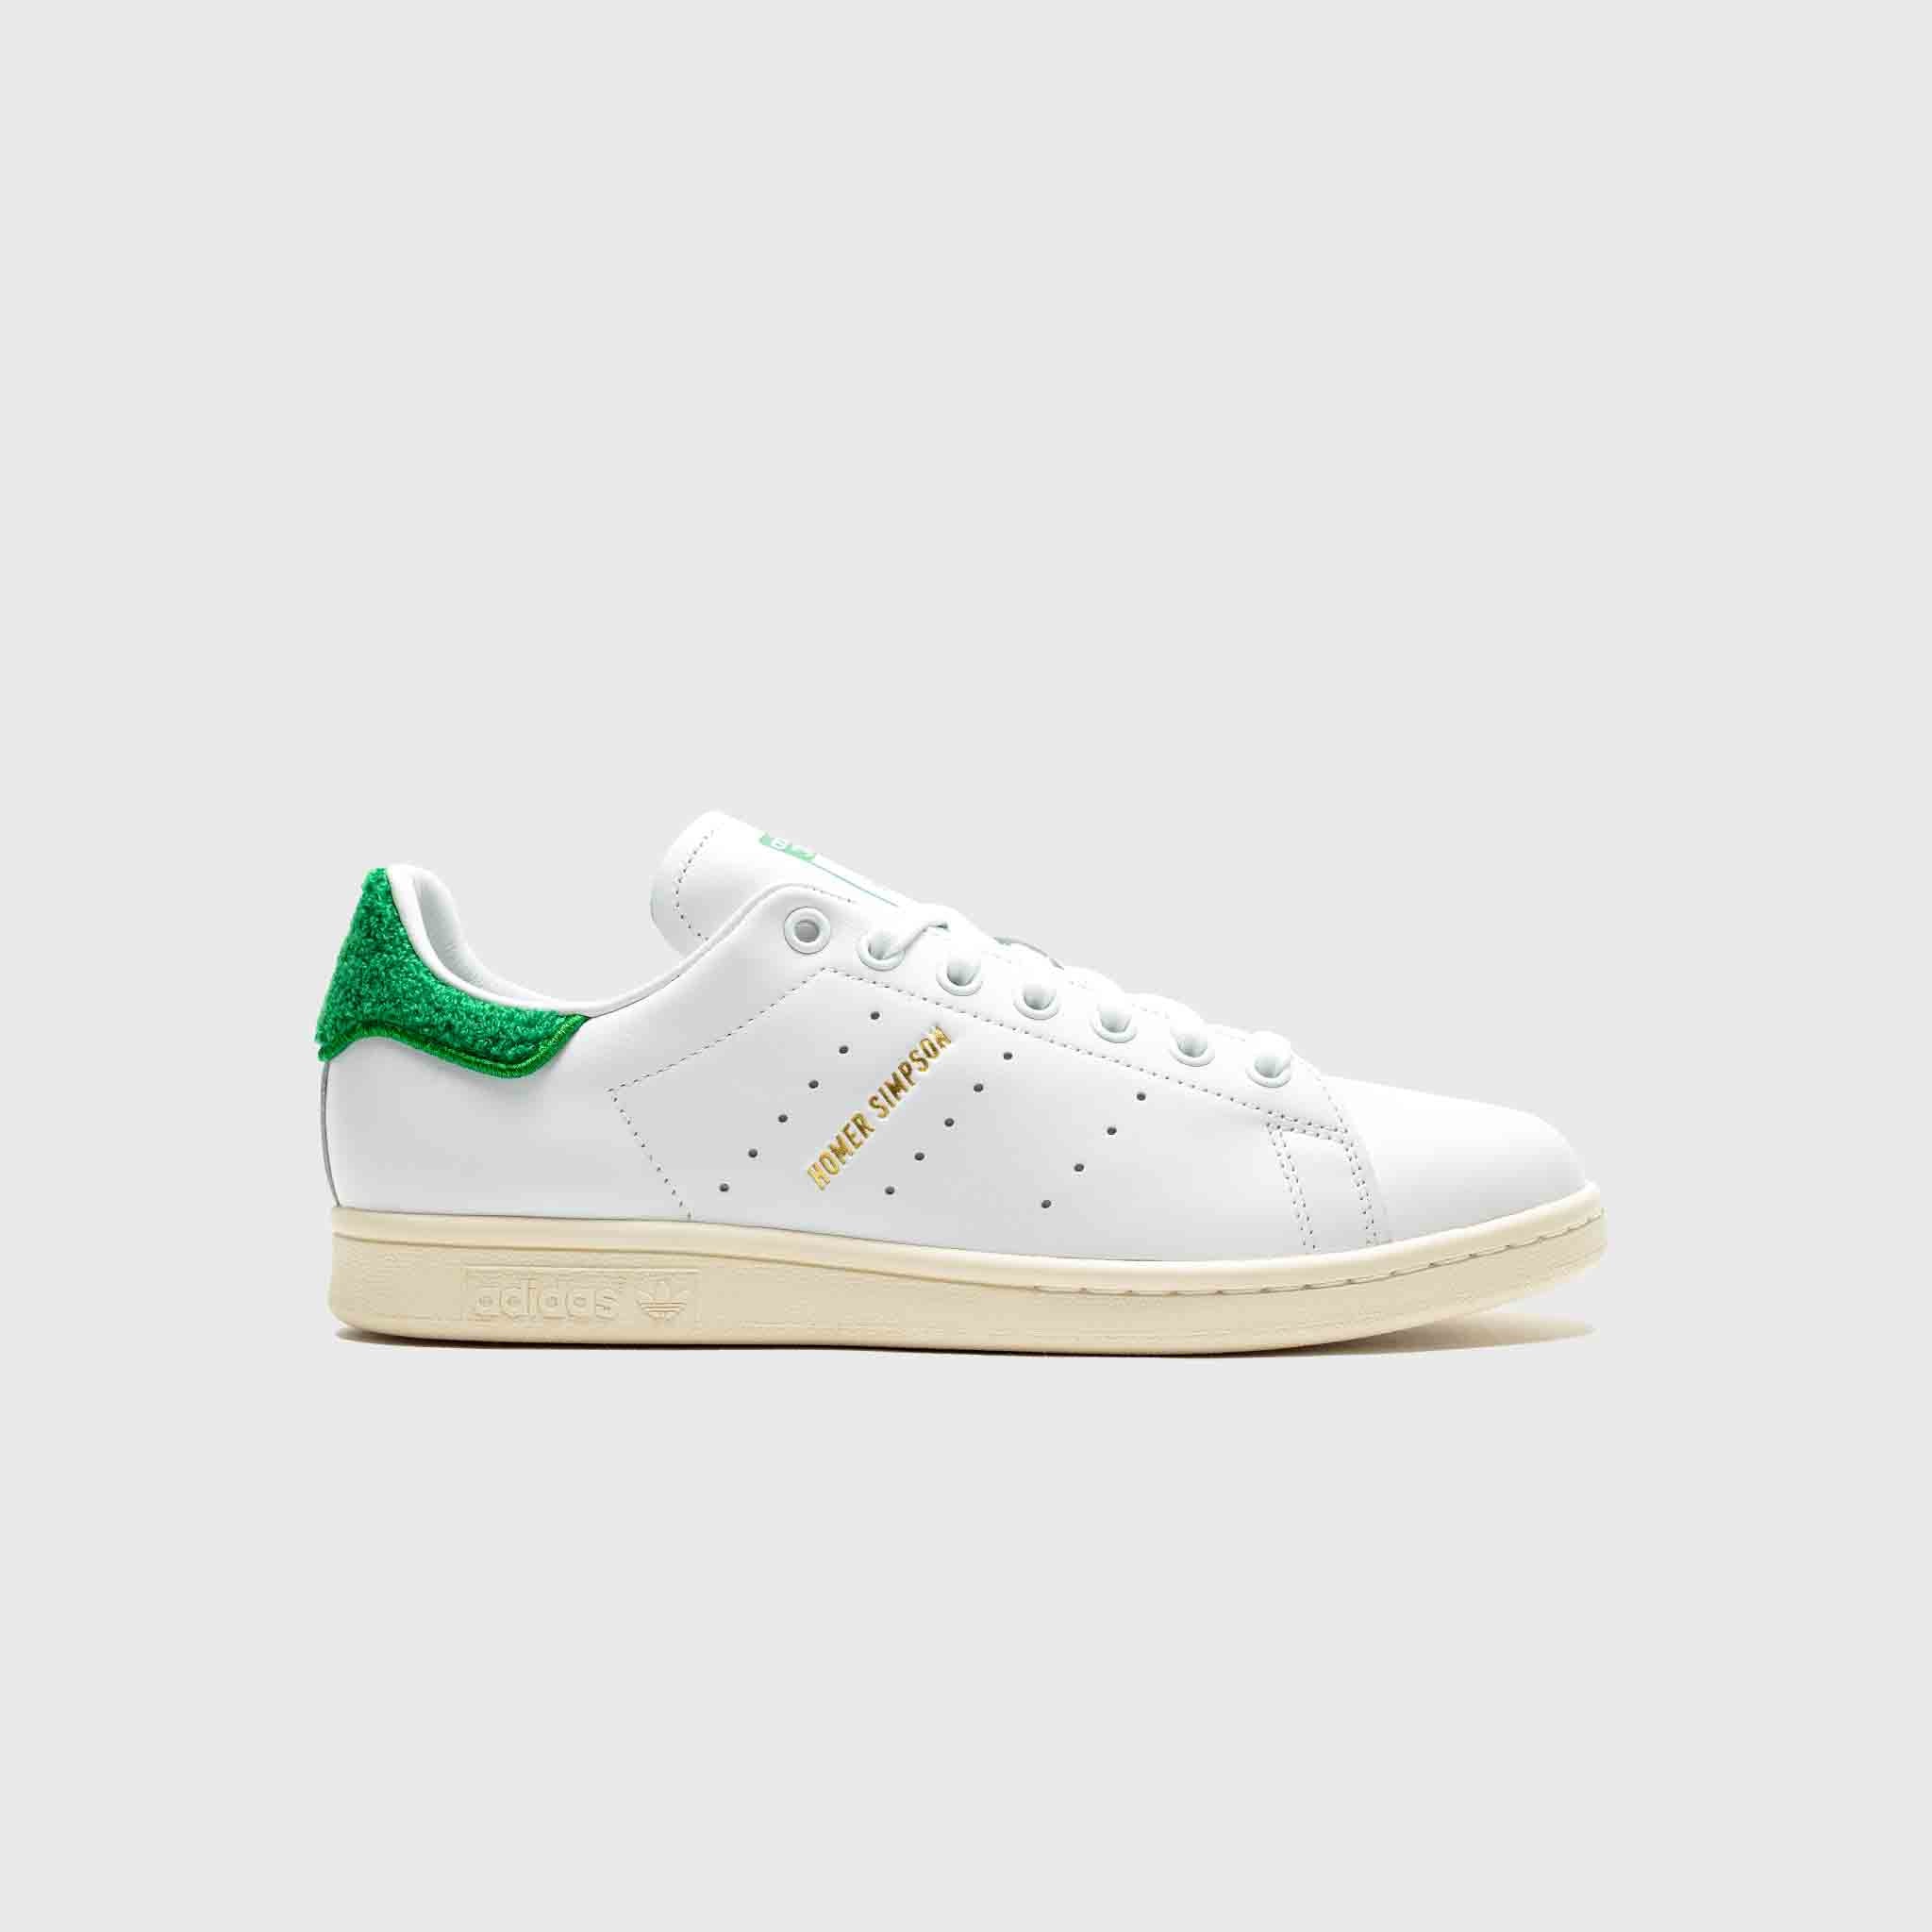 Homer Simpsons adidas Stan Smith IE7564 Release Date